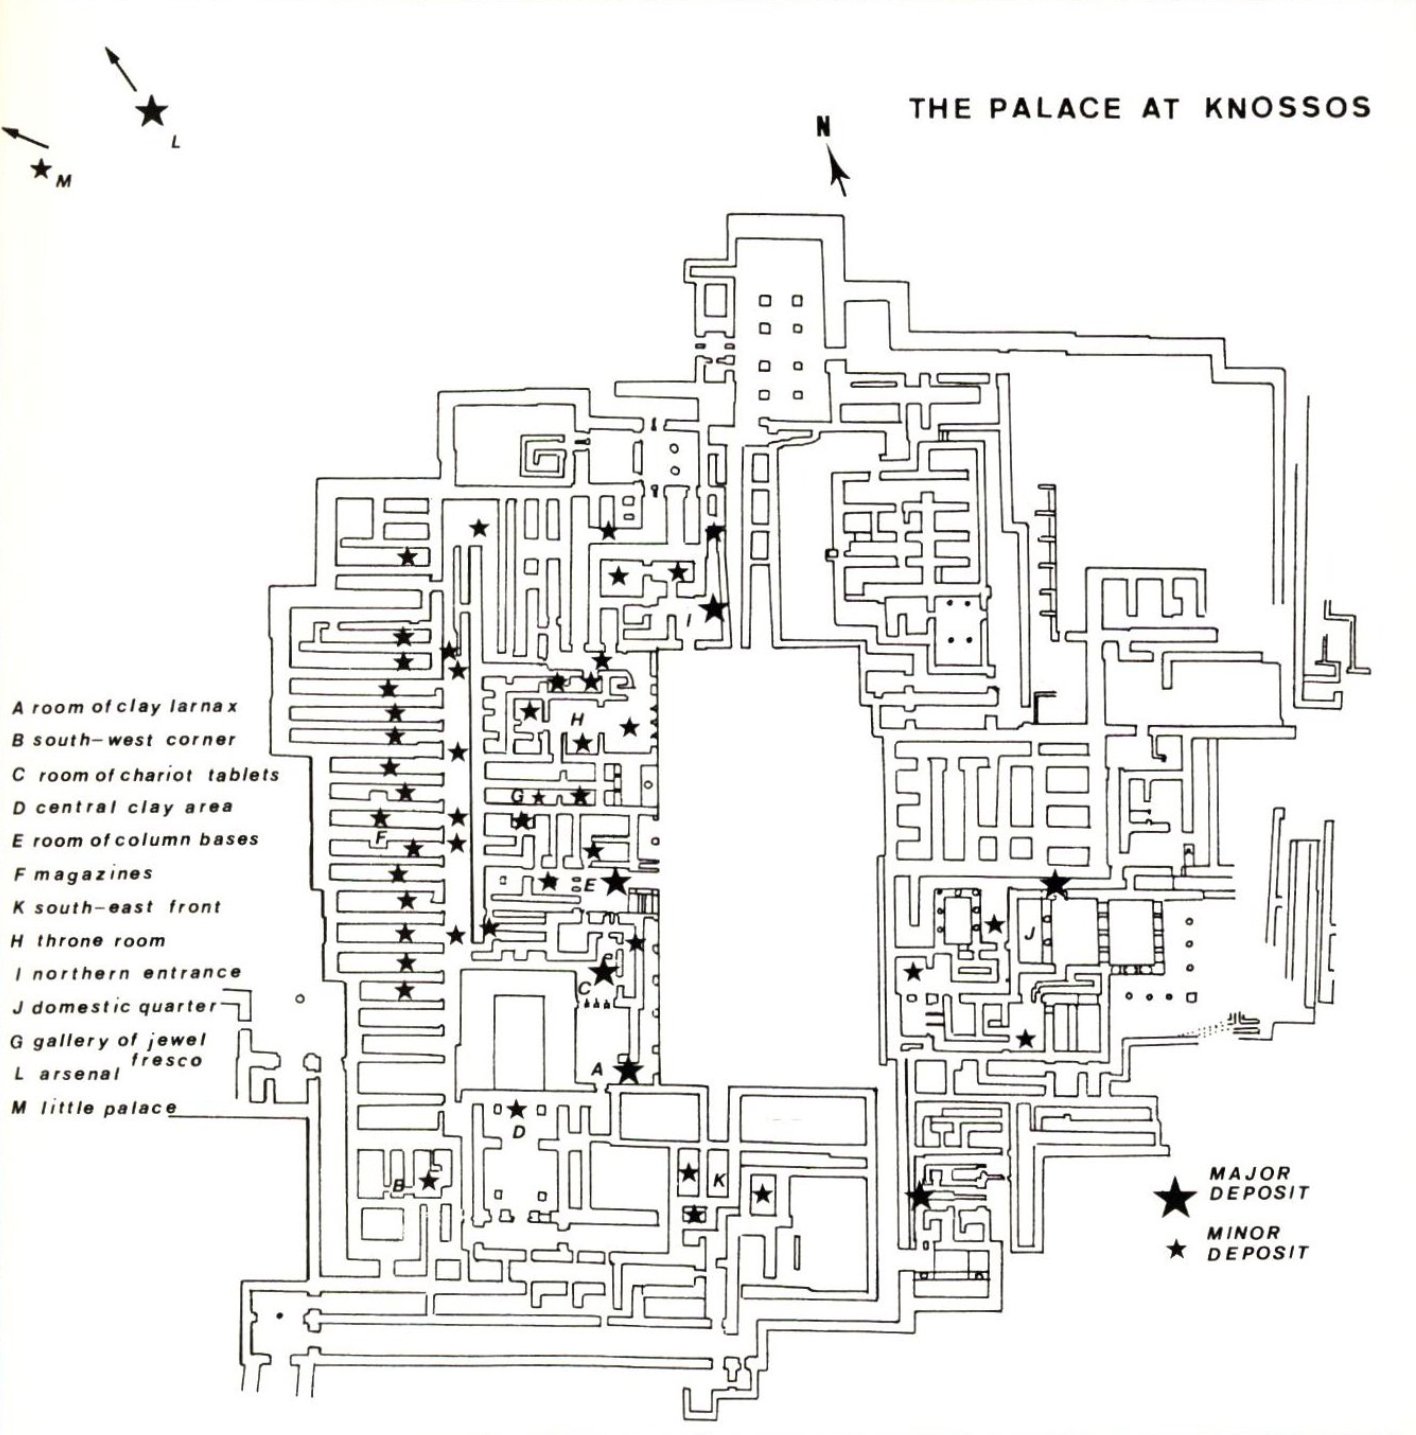 A floor plan of the Palace at Knossos, a Minoan archaeological site in Crete. The plan shows the layout of various rooms and locations of major and minor deposits of artifacts. The plan is labeled with letters and numbers.